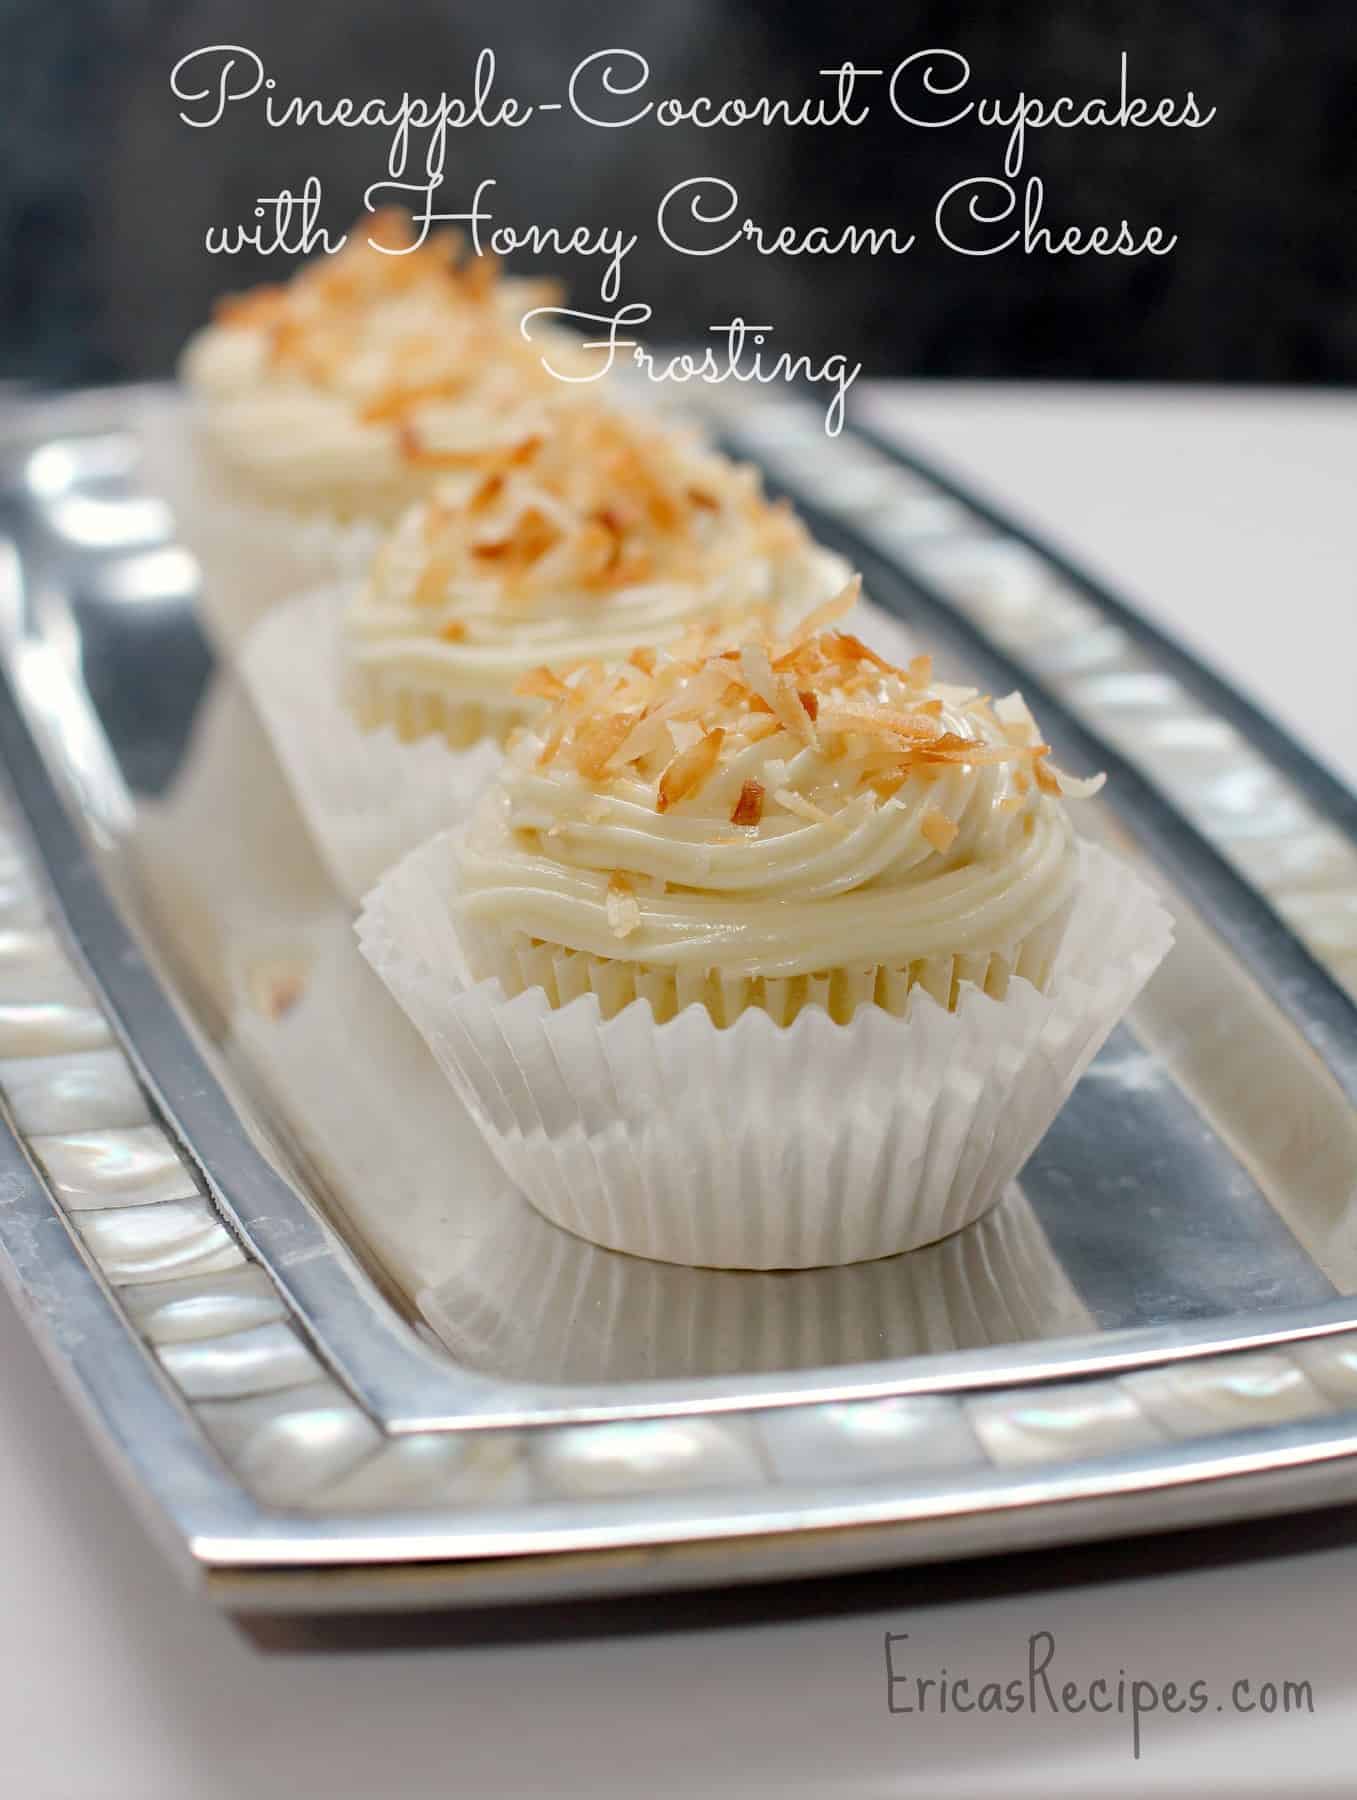 Fluffy, angelic Pineapple Coconut Cupcakes with Honey Cream Cheese Frosting. These dream-like cupcakes are so luscious and decadent, with a perfect balance of sweet. #dessert #recipe #food #pineapple #coconut #cupcake #honey #creamcheese #frosting